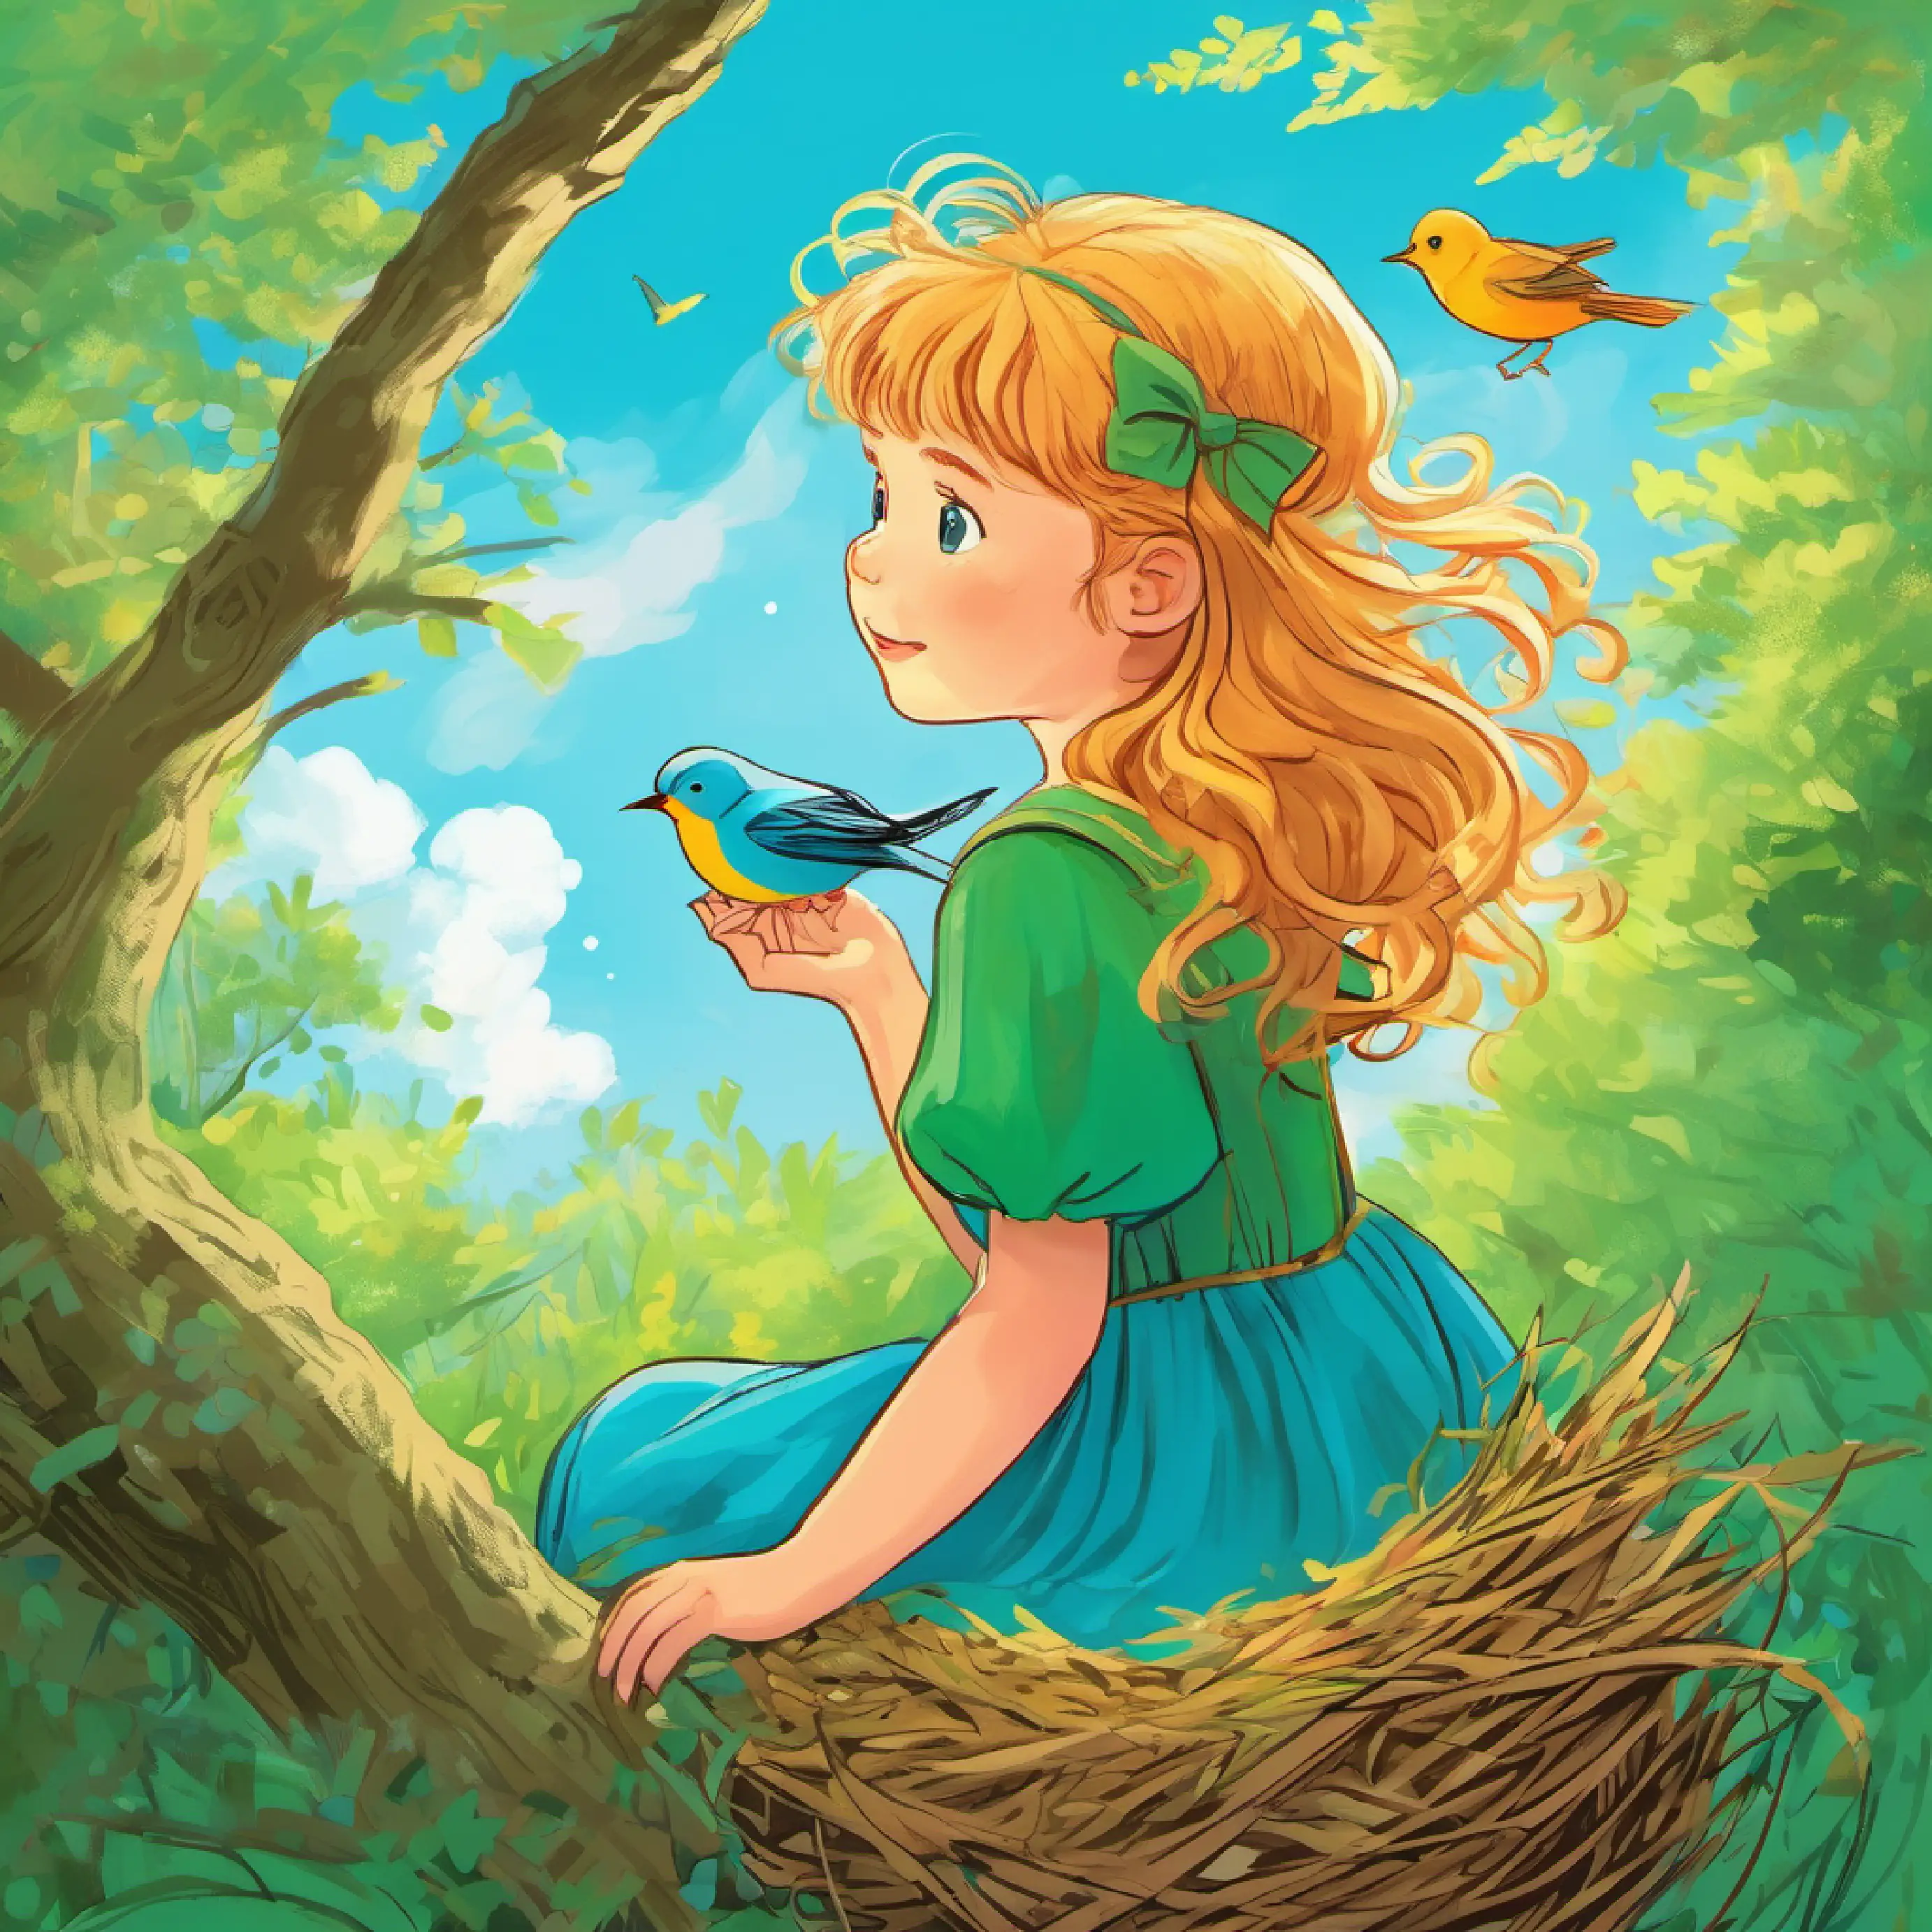 Girl with sunny hair, full of hope, bright blue eyes, wears a green dress at the top, whispering her thanks to a bird's nest.